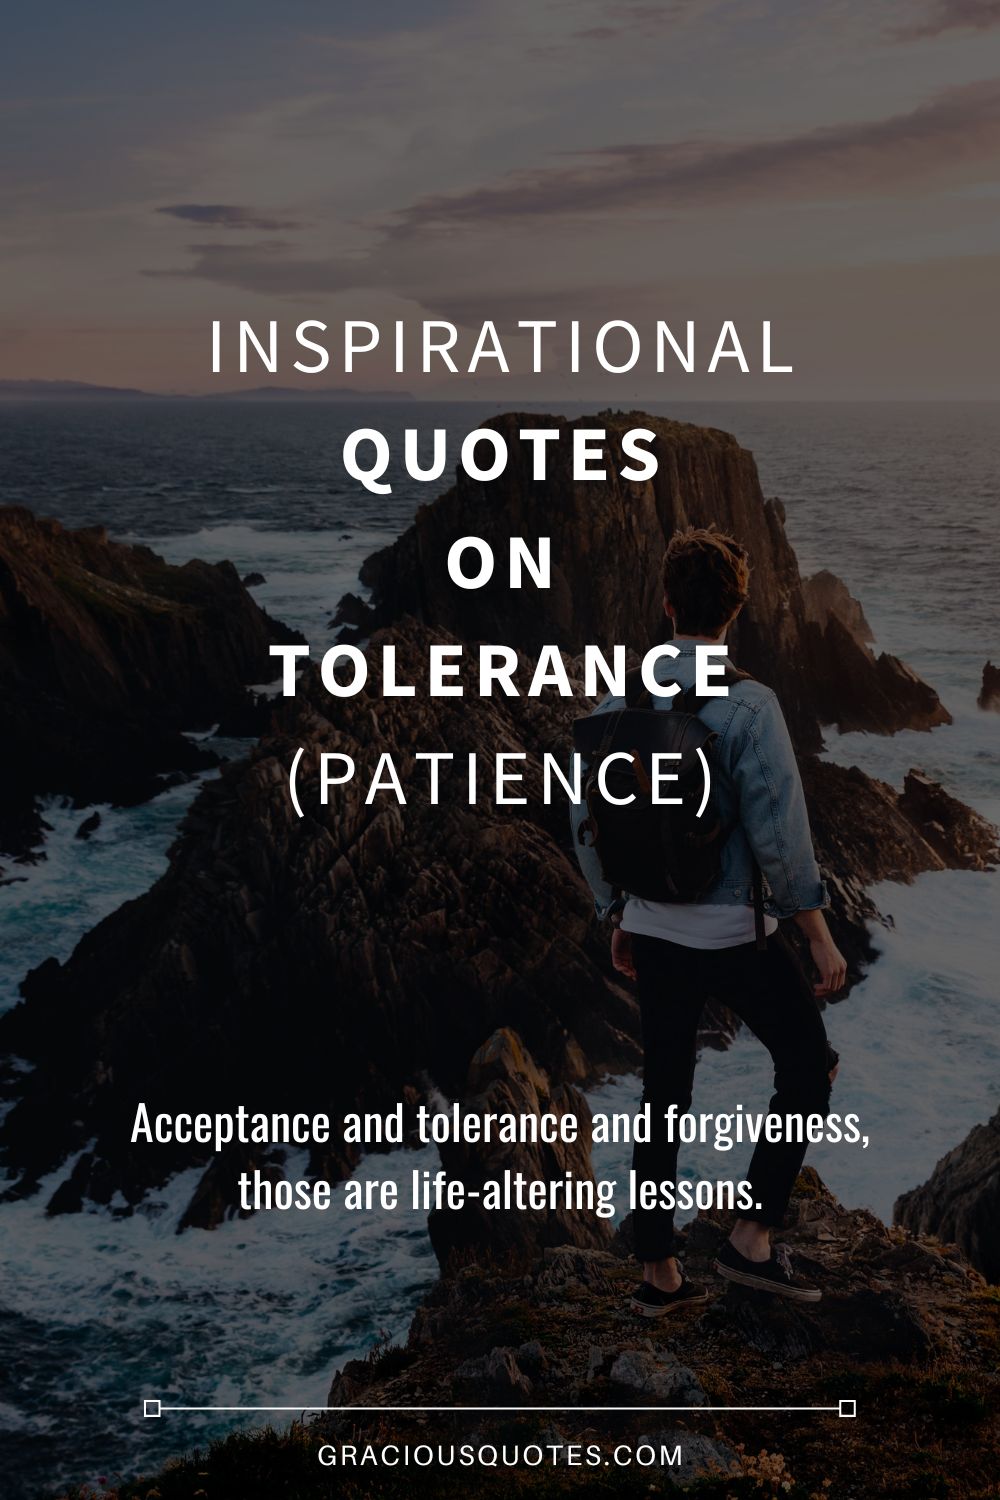 84 Inspirational Quotes on Tolerance (PATIENCE)